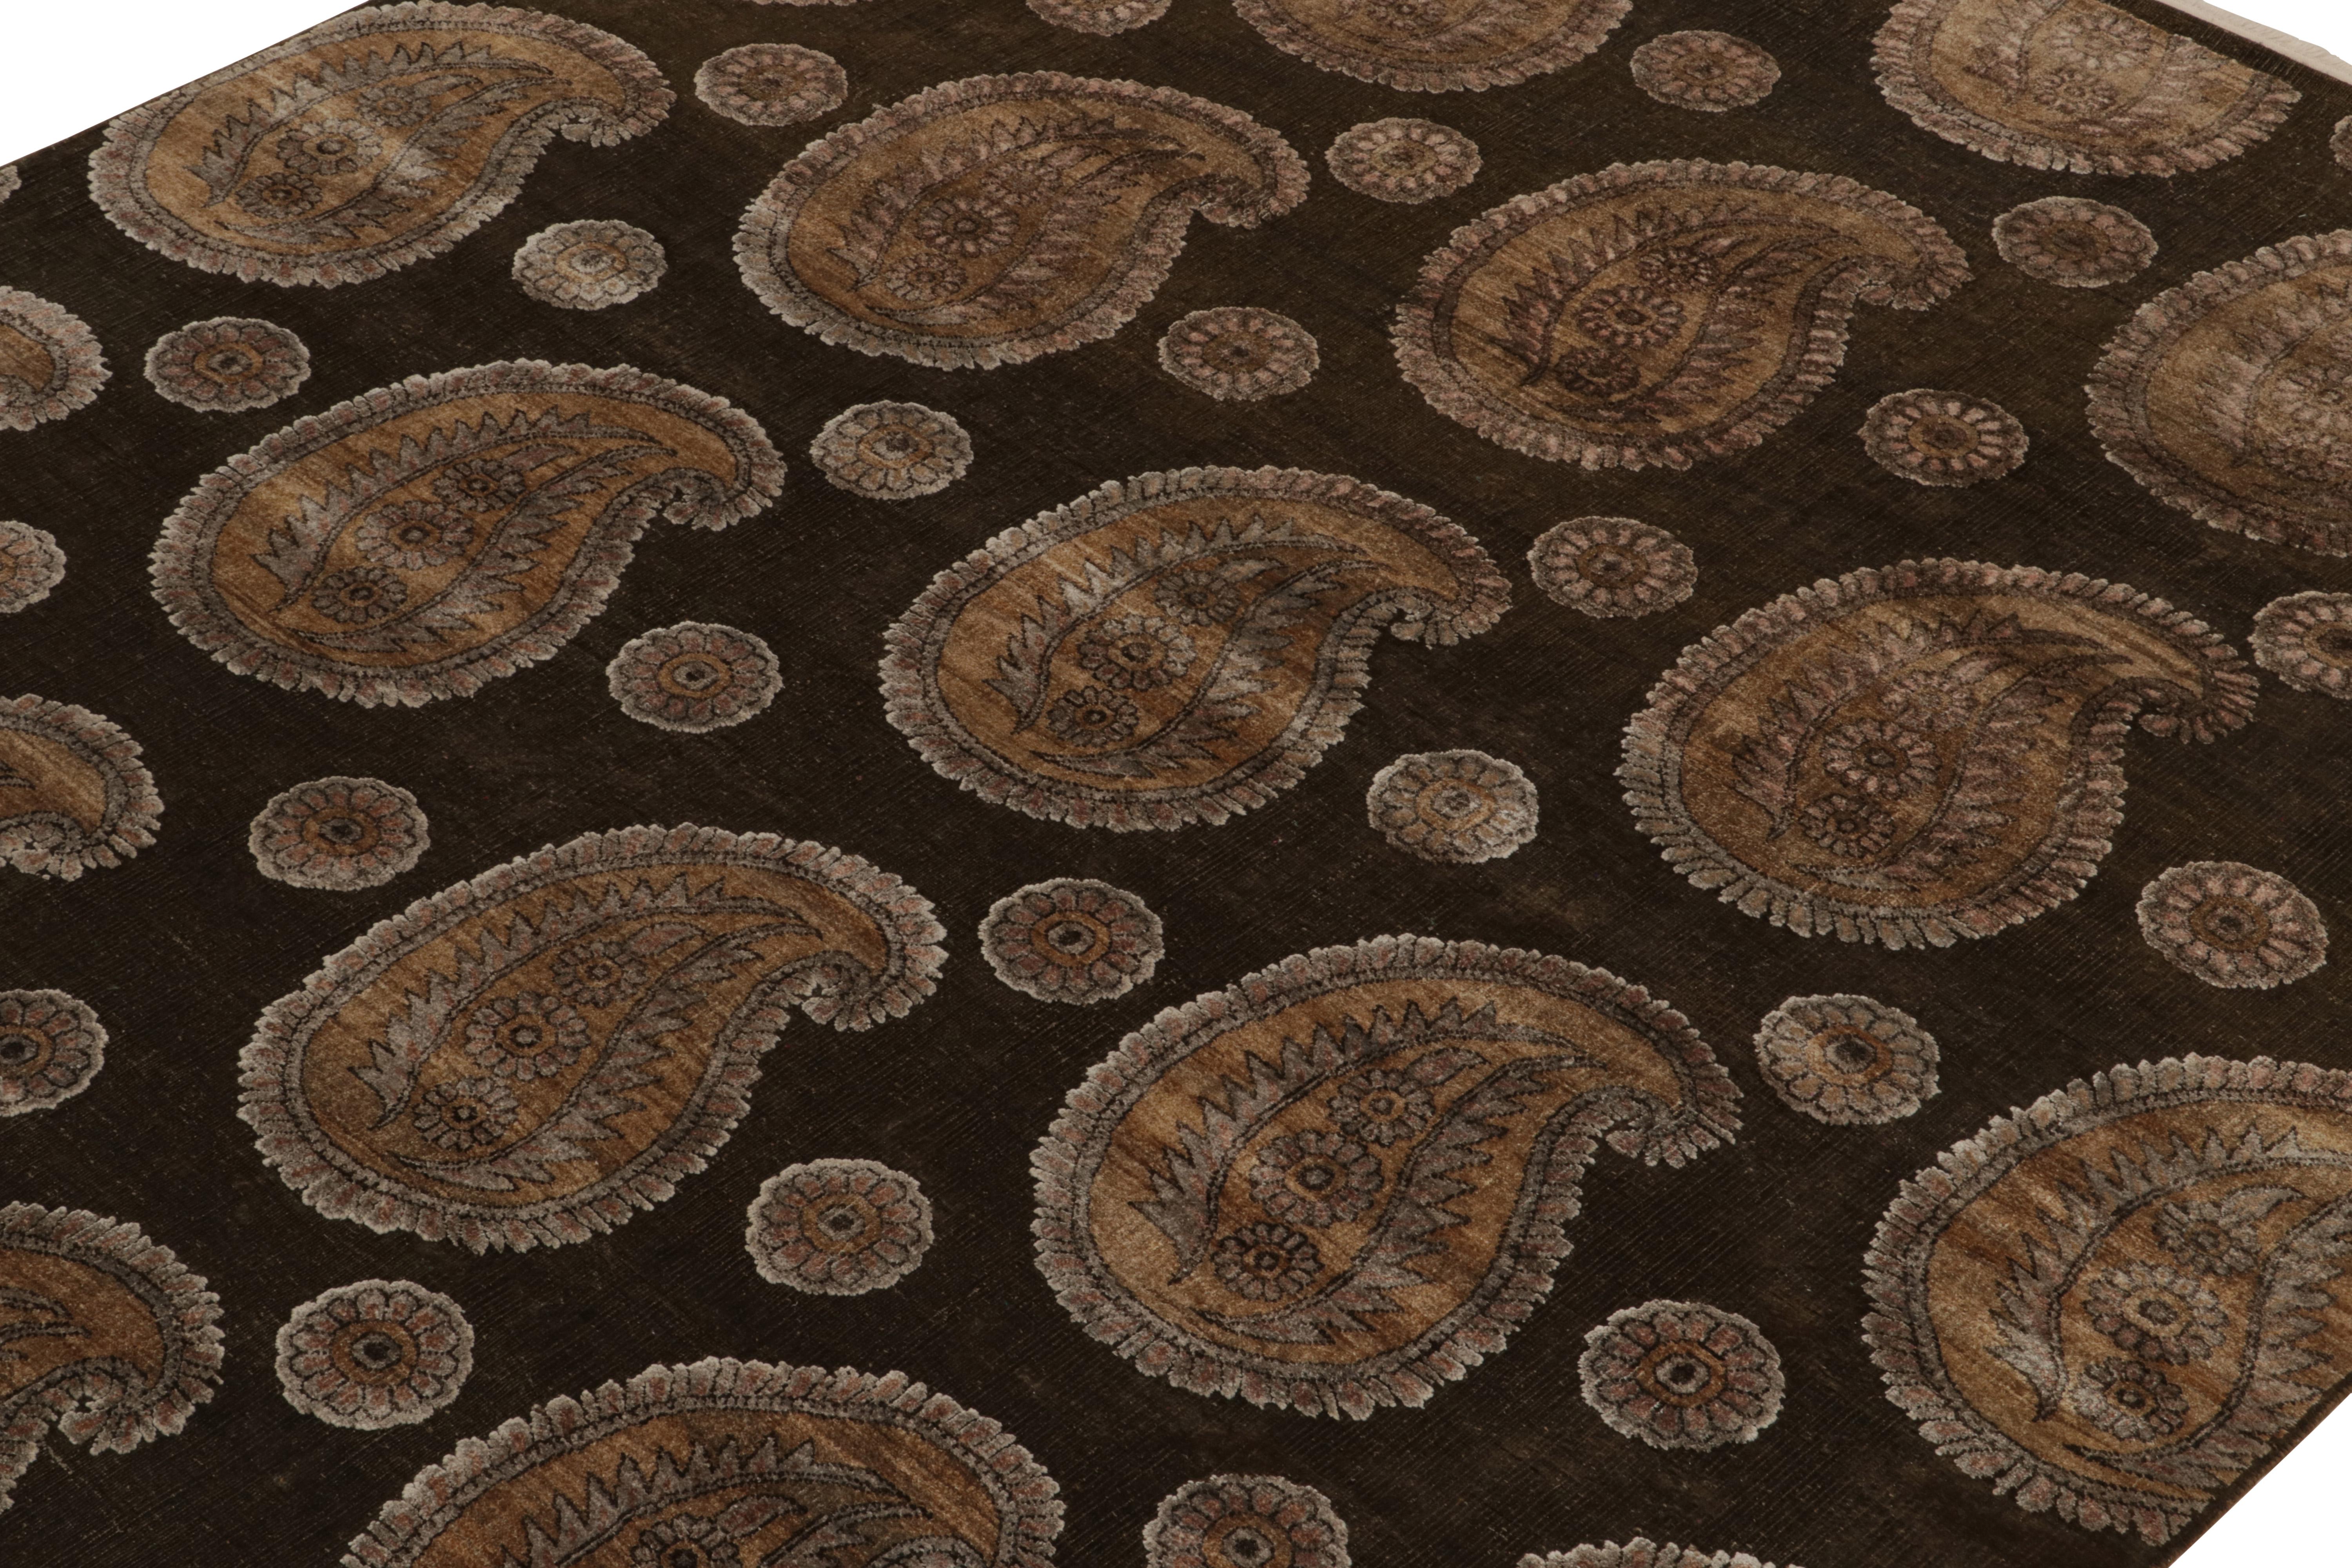 Hand-Knotted Rug & Kilim’s Classic style rug in Beige, Brown and Gold Paisley Patterns For Sale